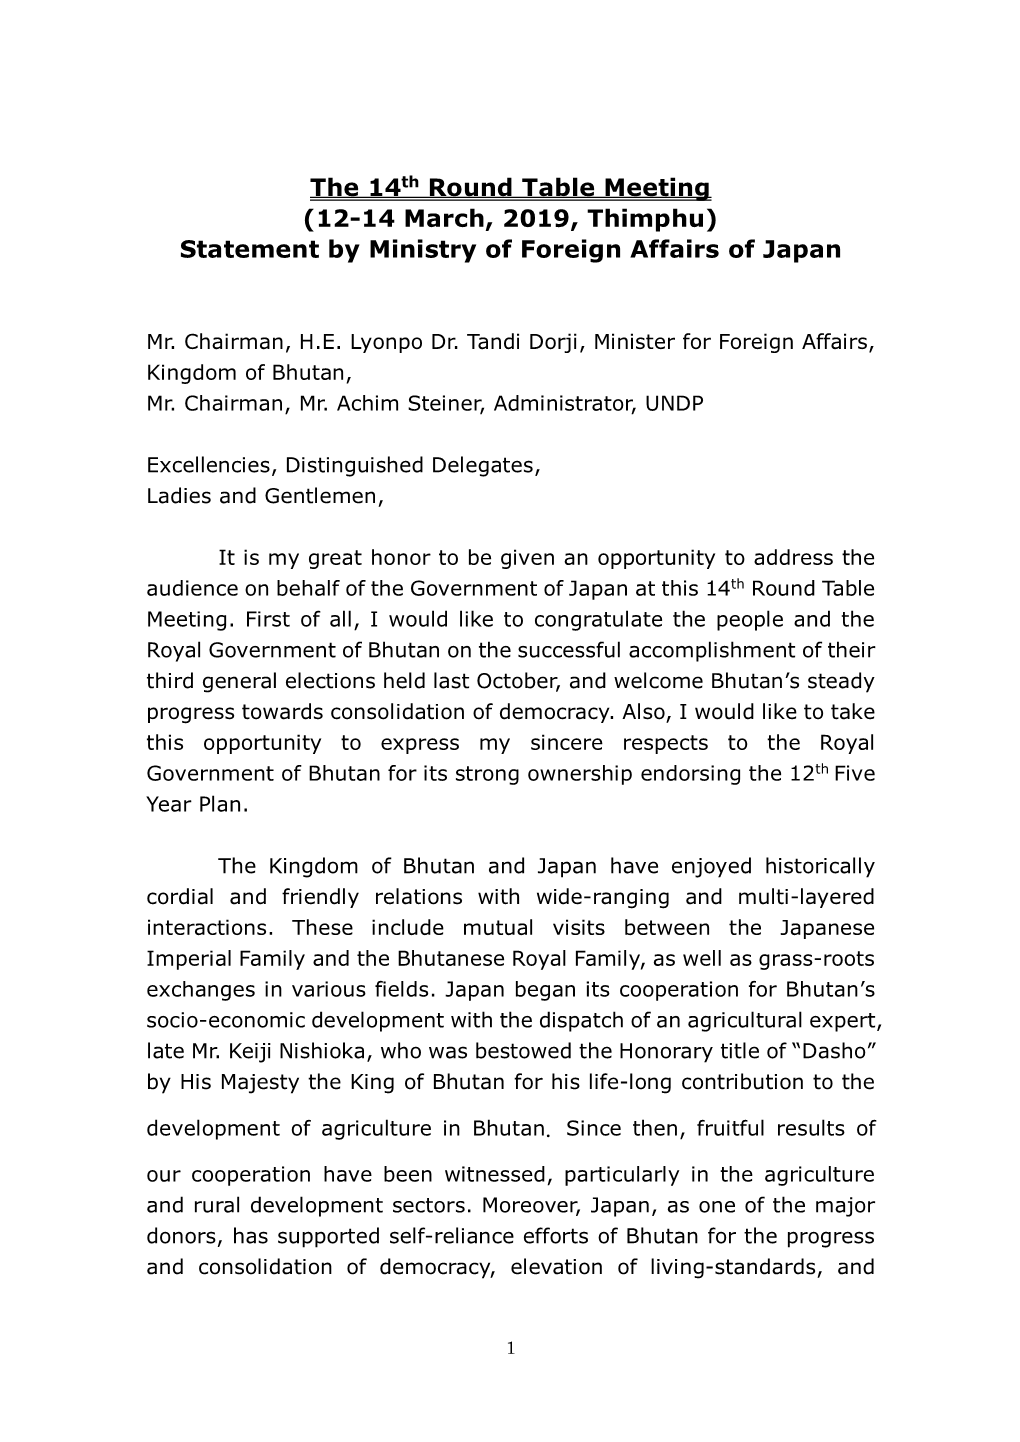 Statement by Ministry of Foreign Affairs of Japan